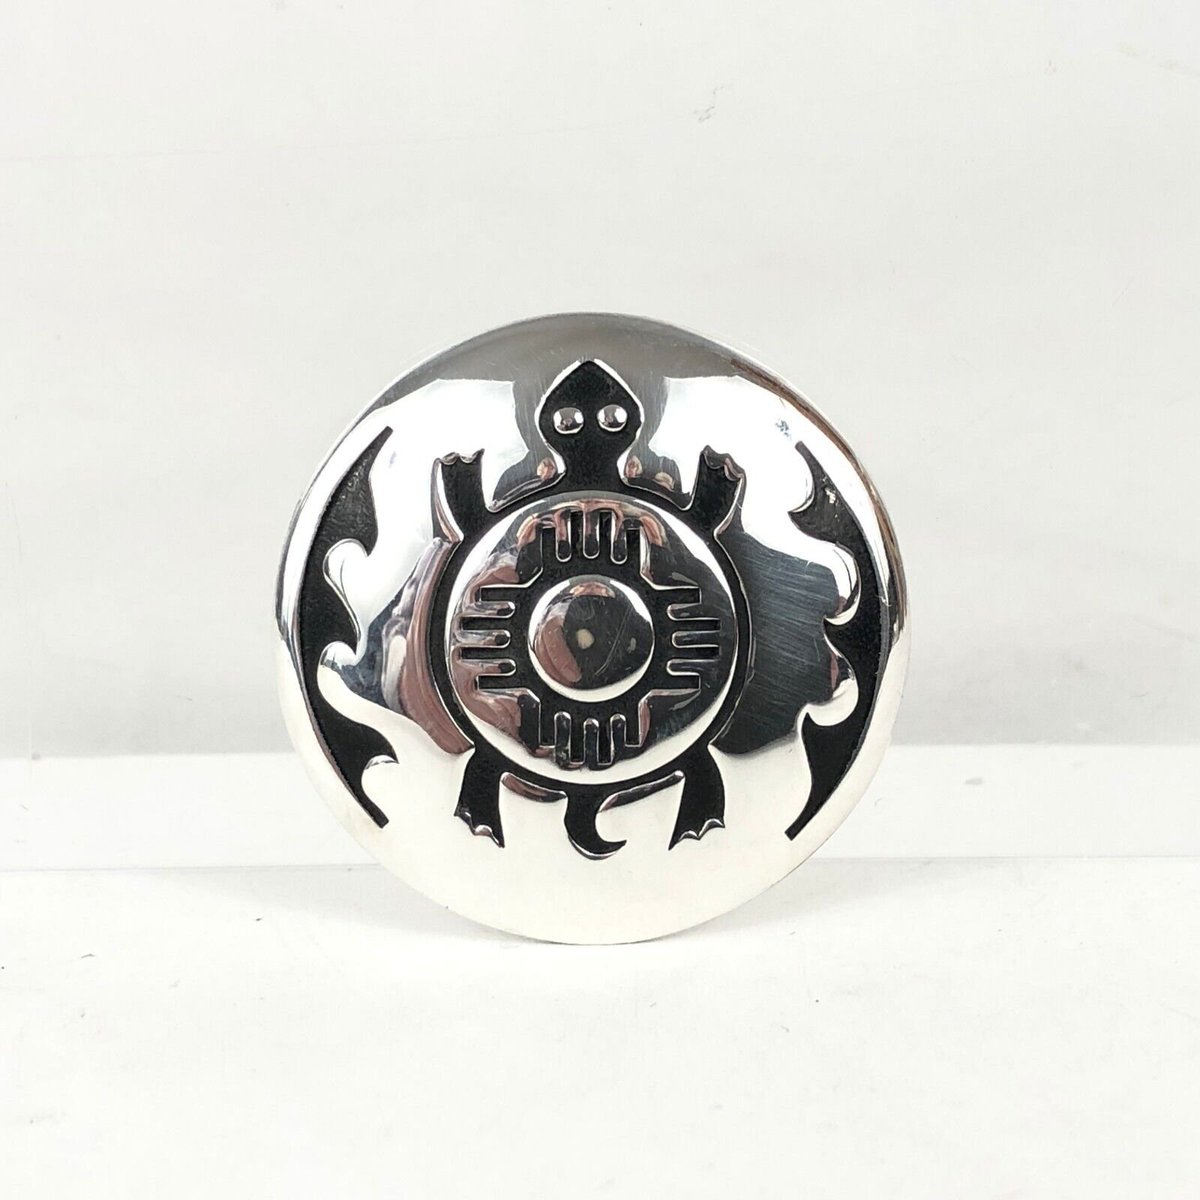 Check out Hopi Overlay Turtle Sun Sterling Silver 925 Pin Brooch Pre-Owned Estate Jewelry ebay.com/itm/1257780011…

#hopi #hopijewelry #nativeamericanjewelry #southwesternjewelry #tribaljewelry #turtlepin
#turtlebrooch #estatejewelry #sterlingpin